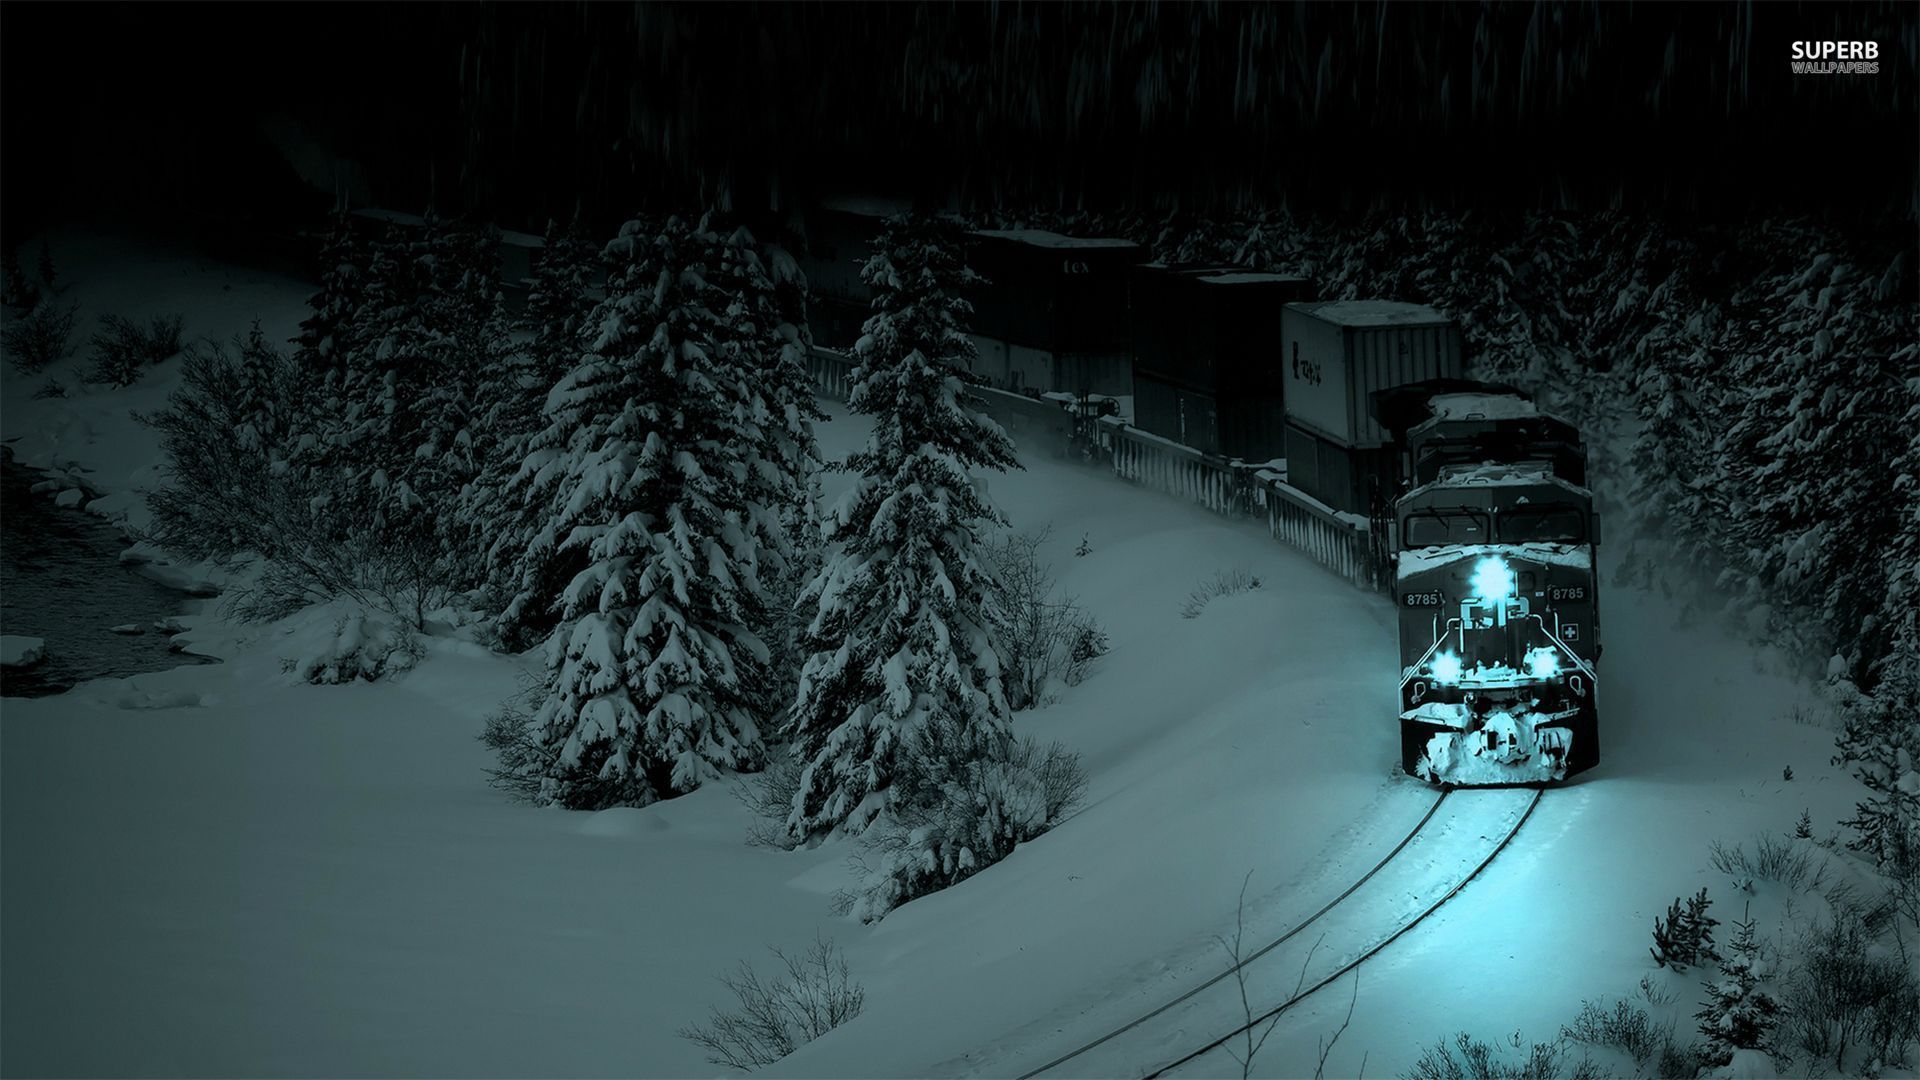 Train in the winter night wallpaper - Photography wallpapers -